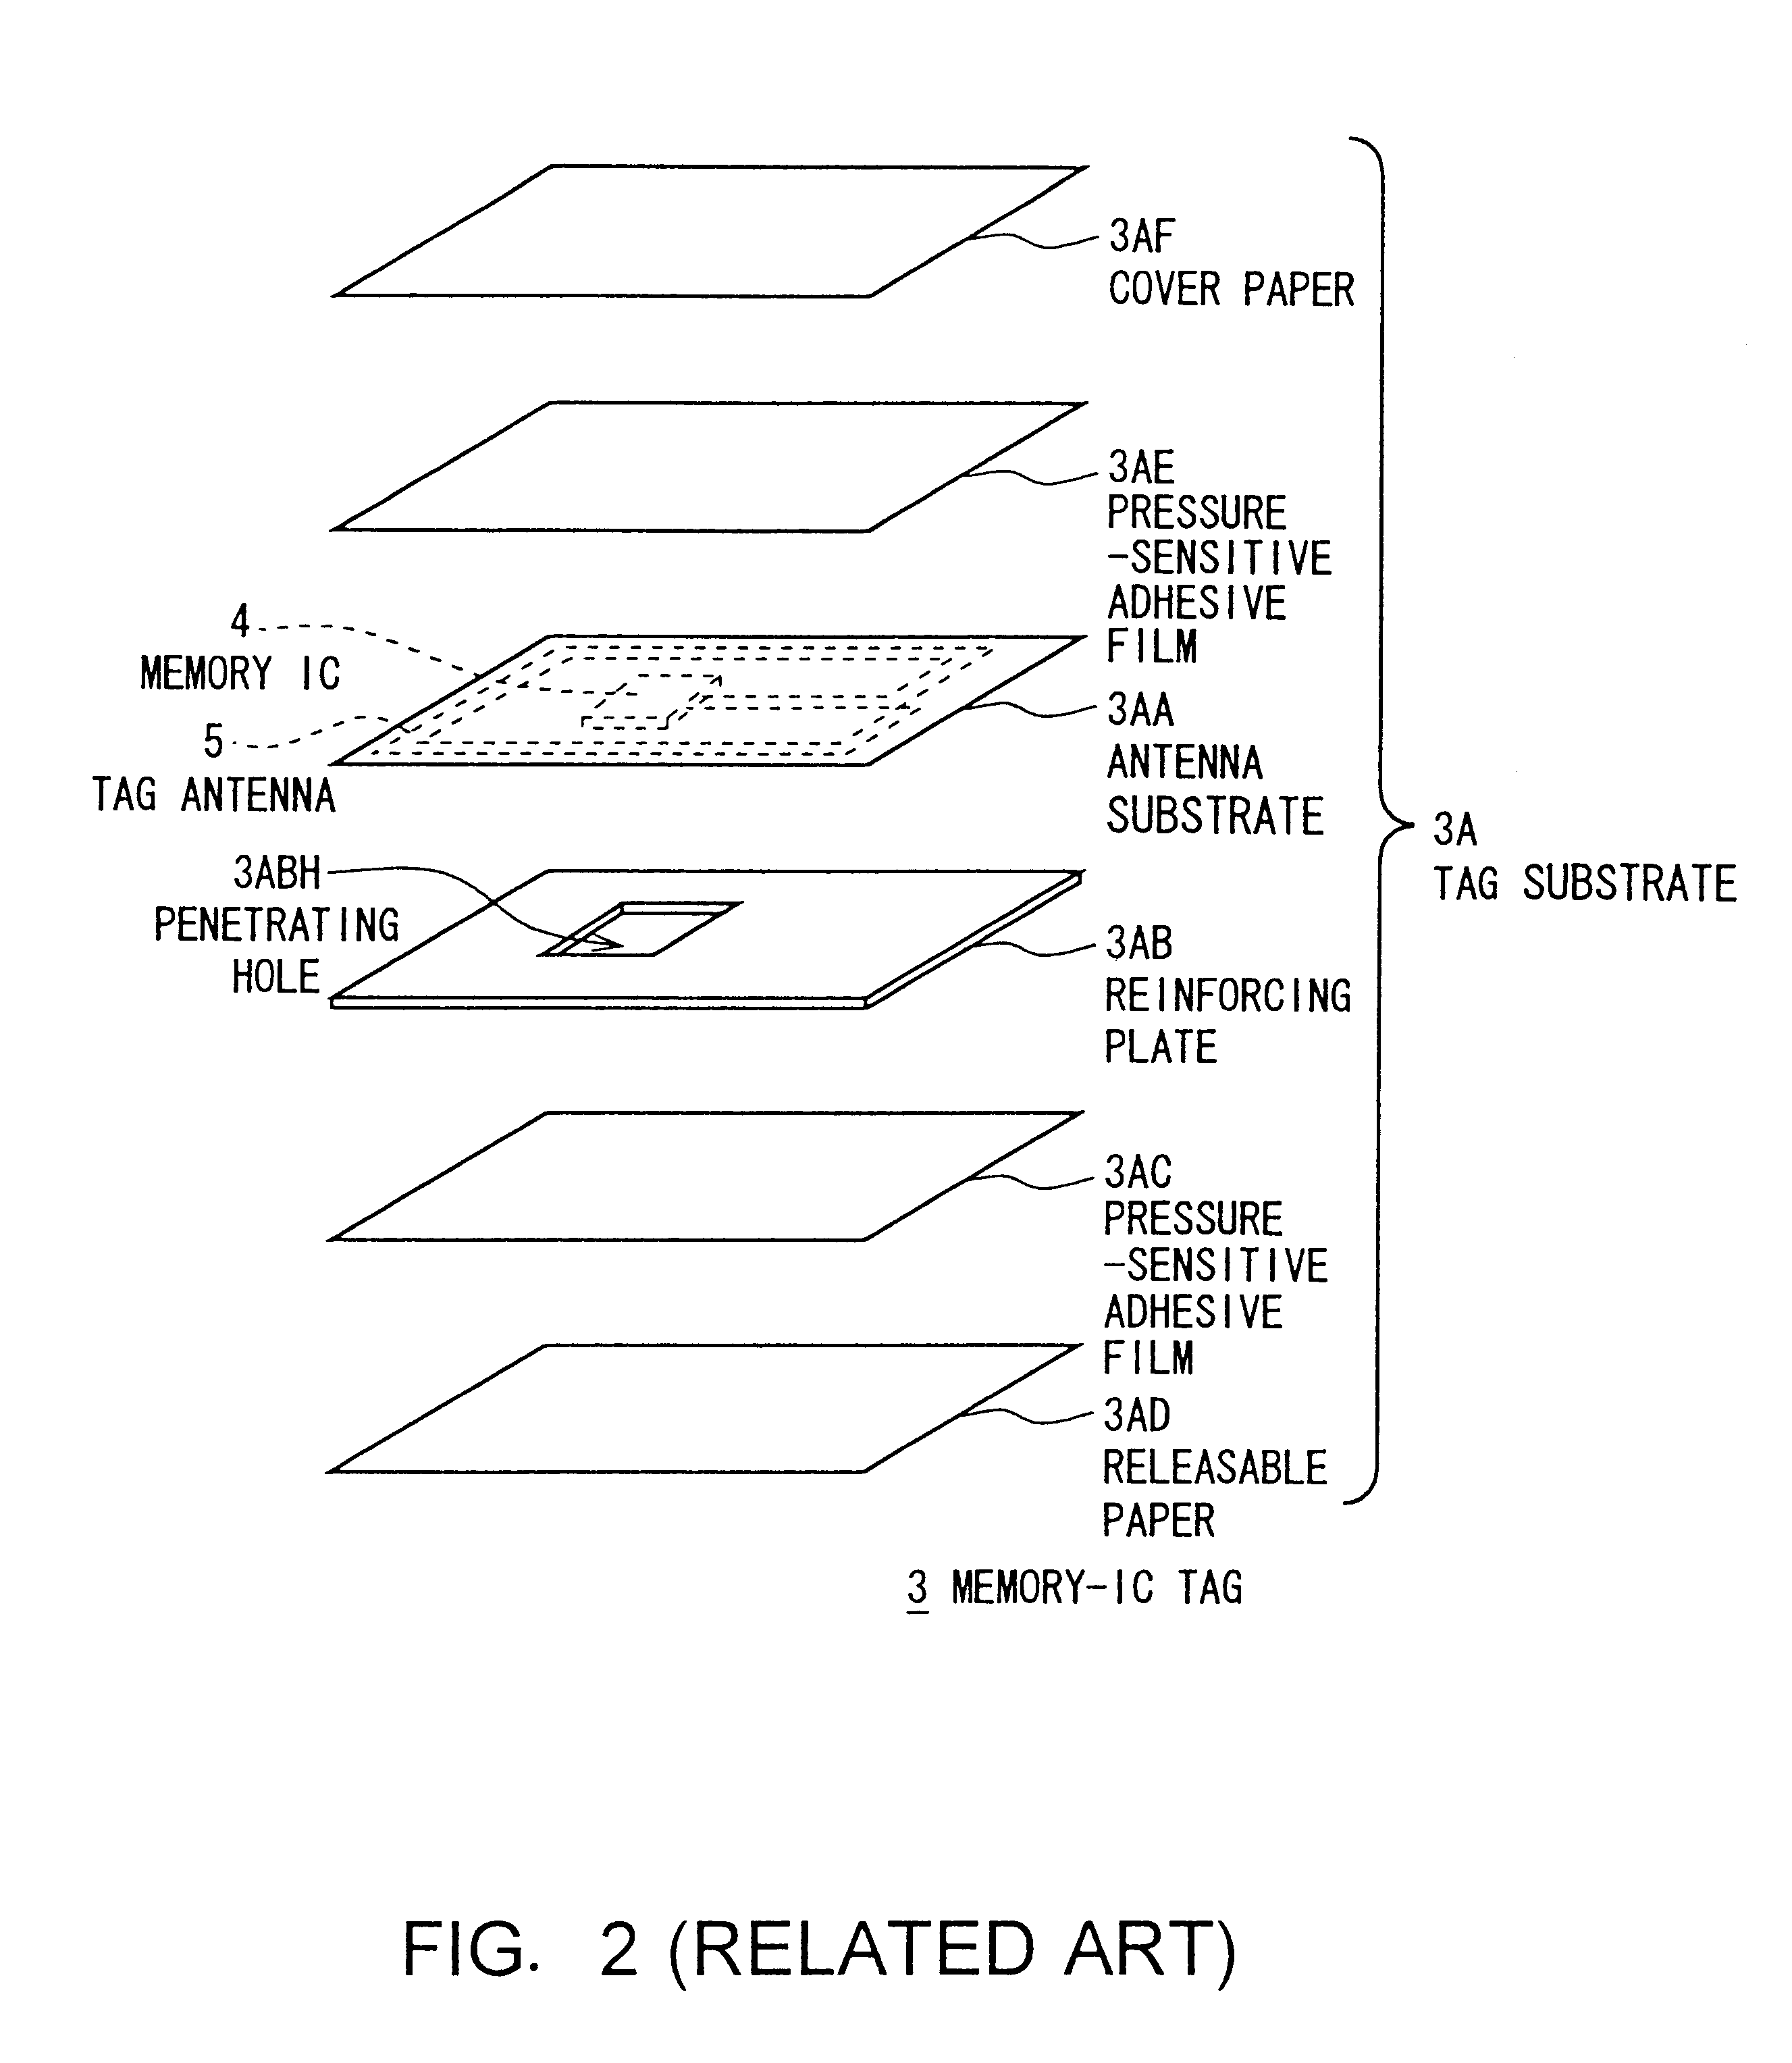 Non-contacting-type information storing device